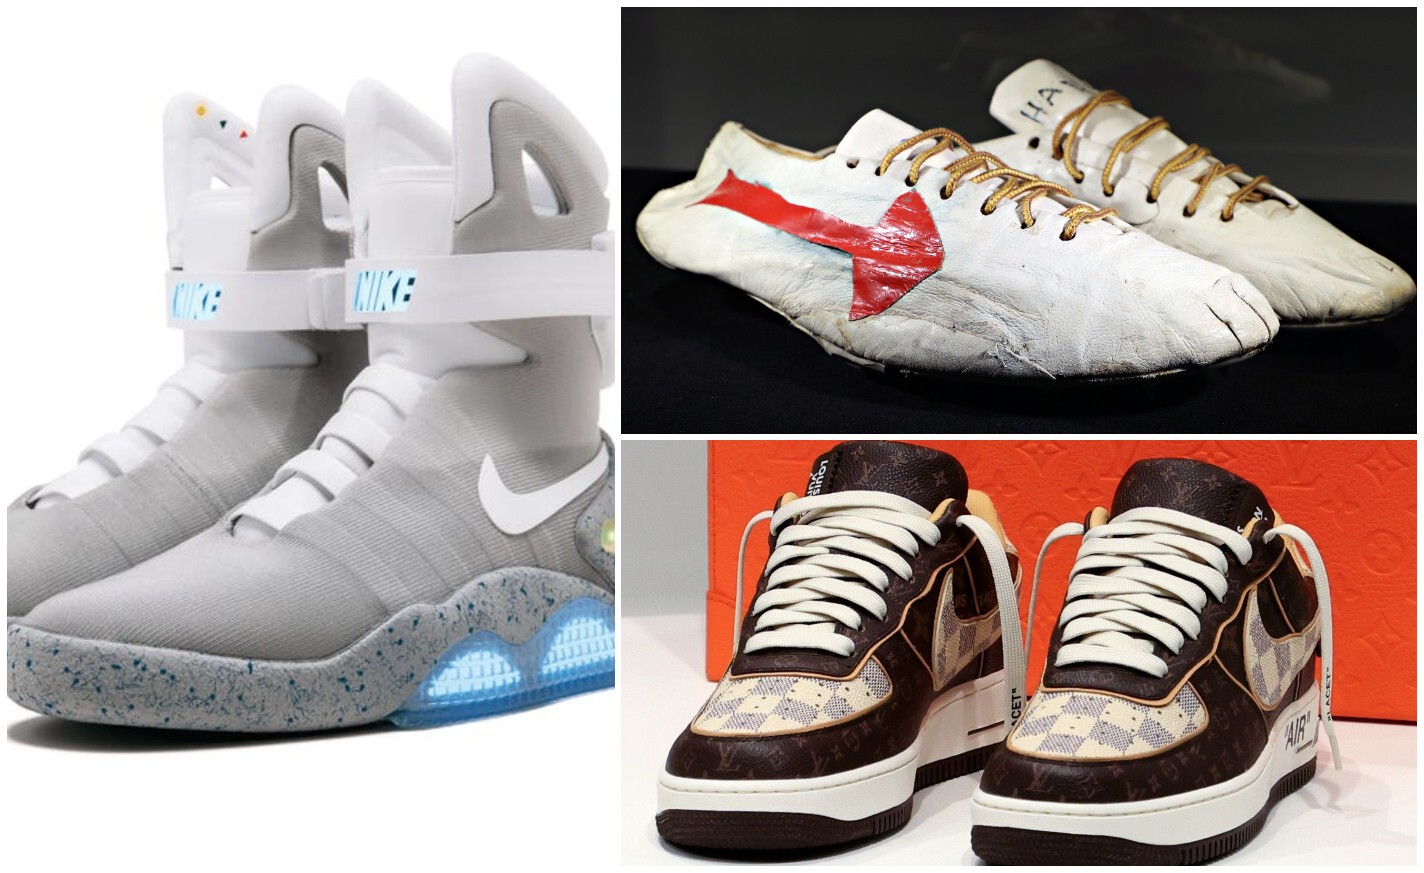 what is the most expensive pair of sneakers